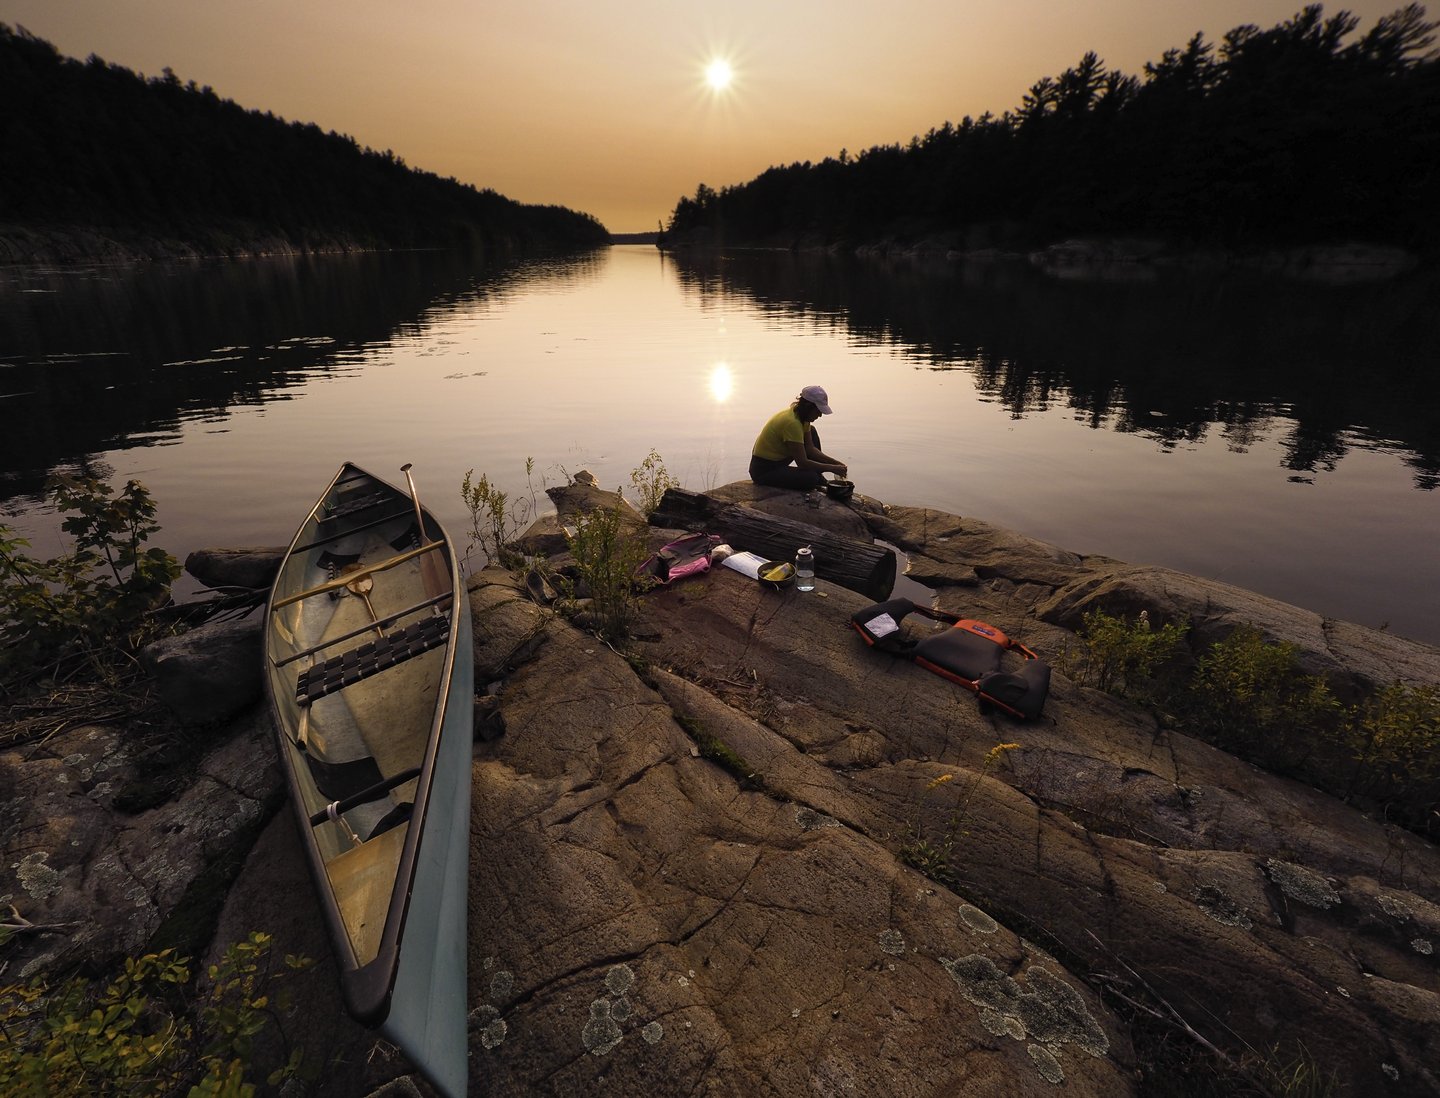 A person sitting on a rocky shore with a canoe.